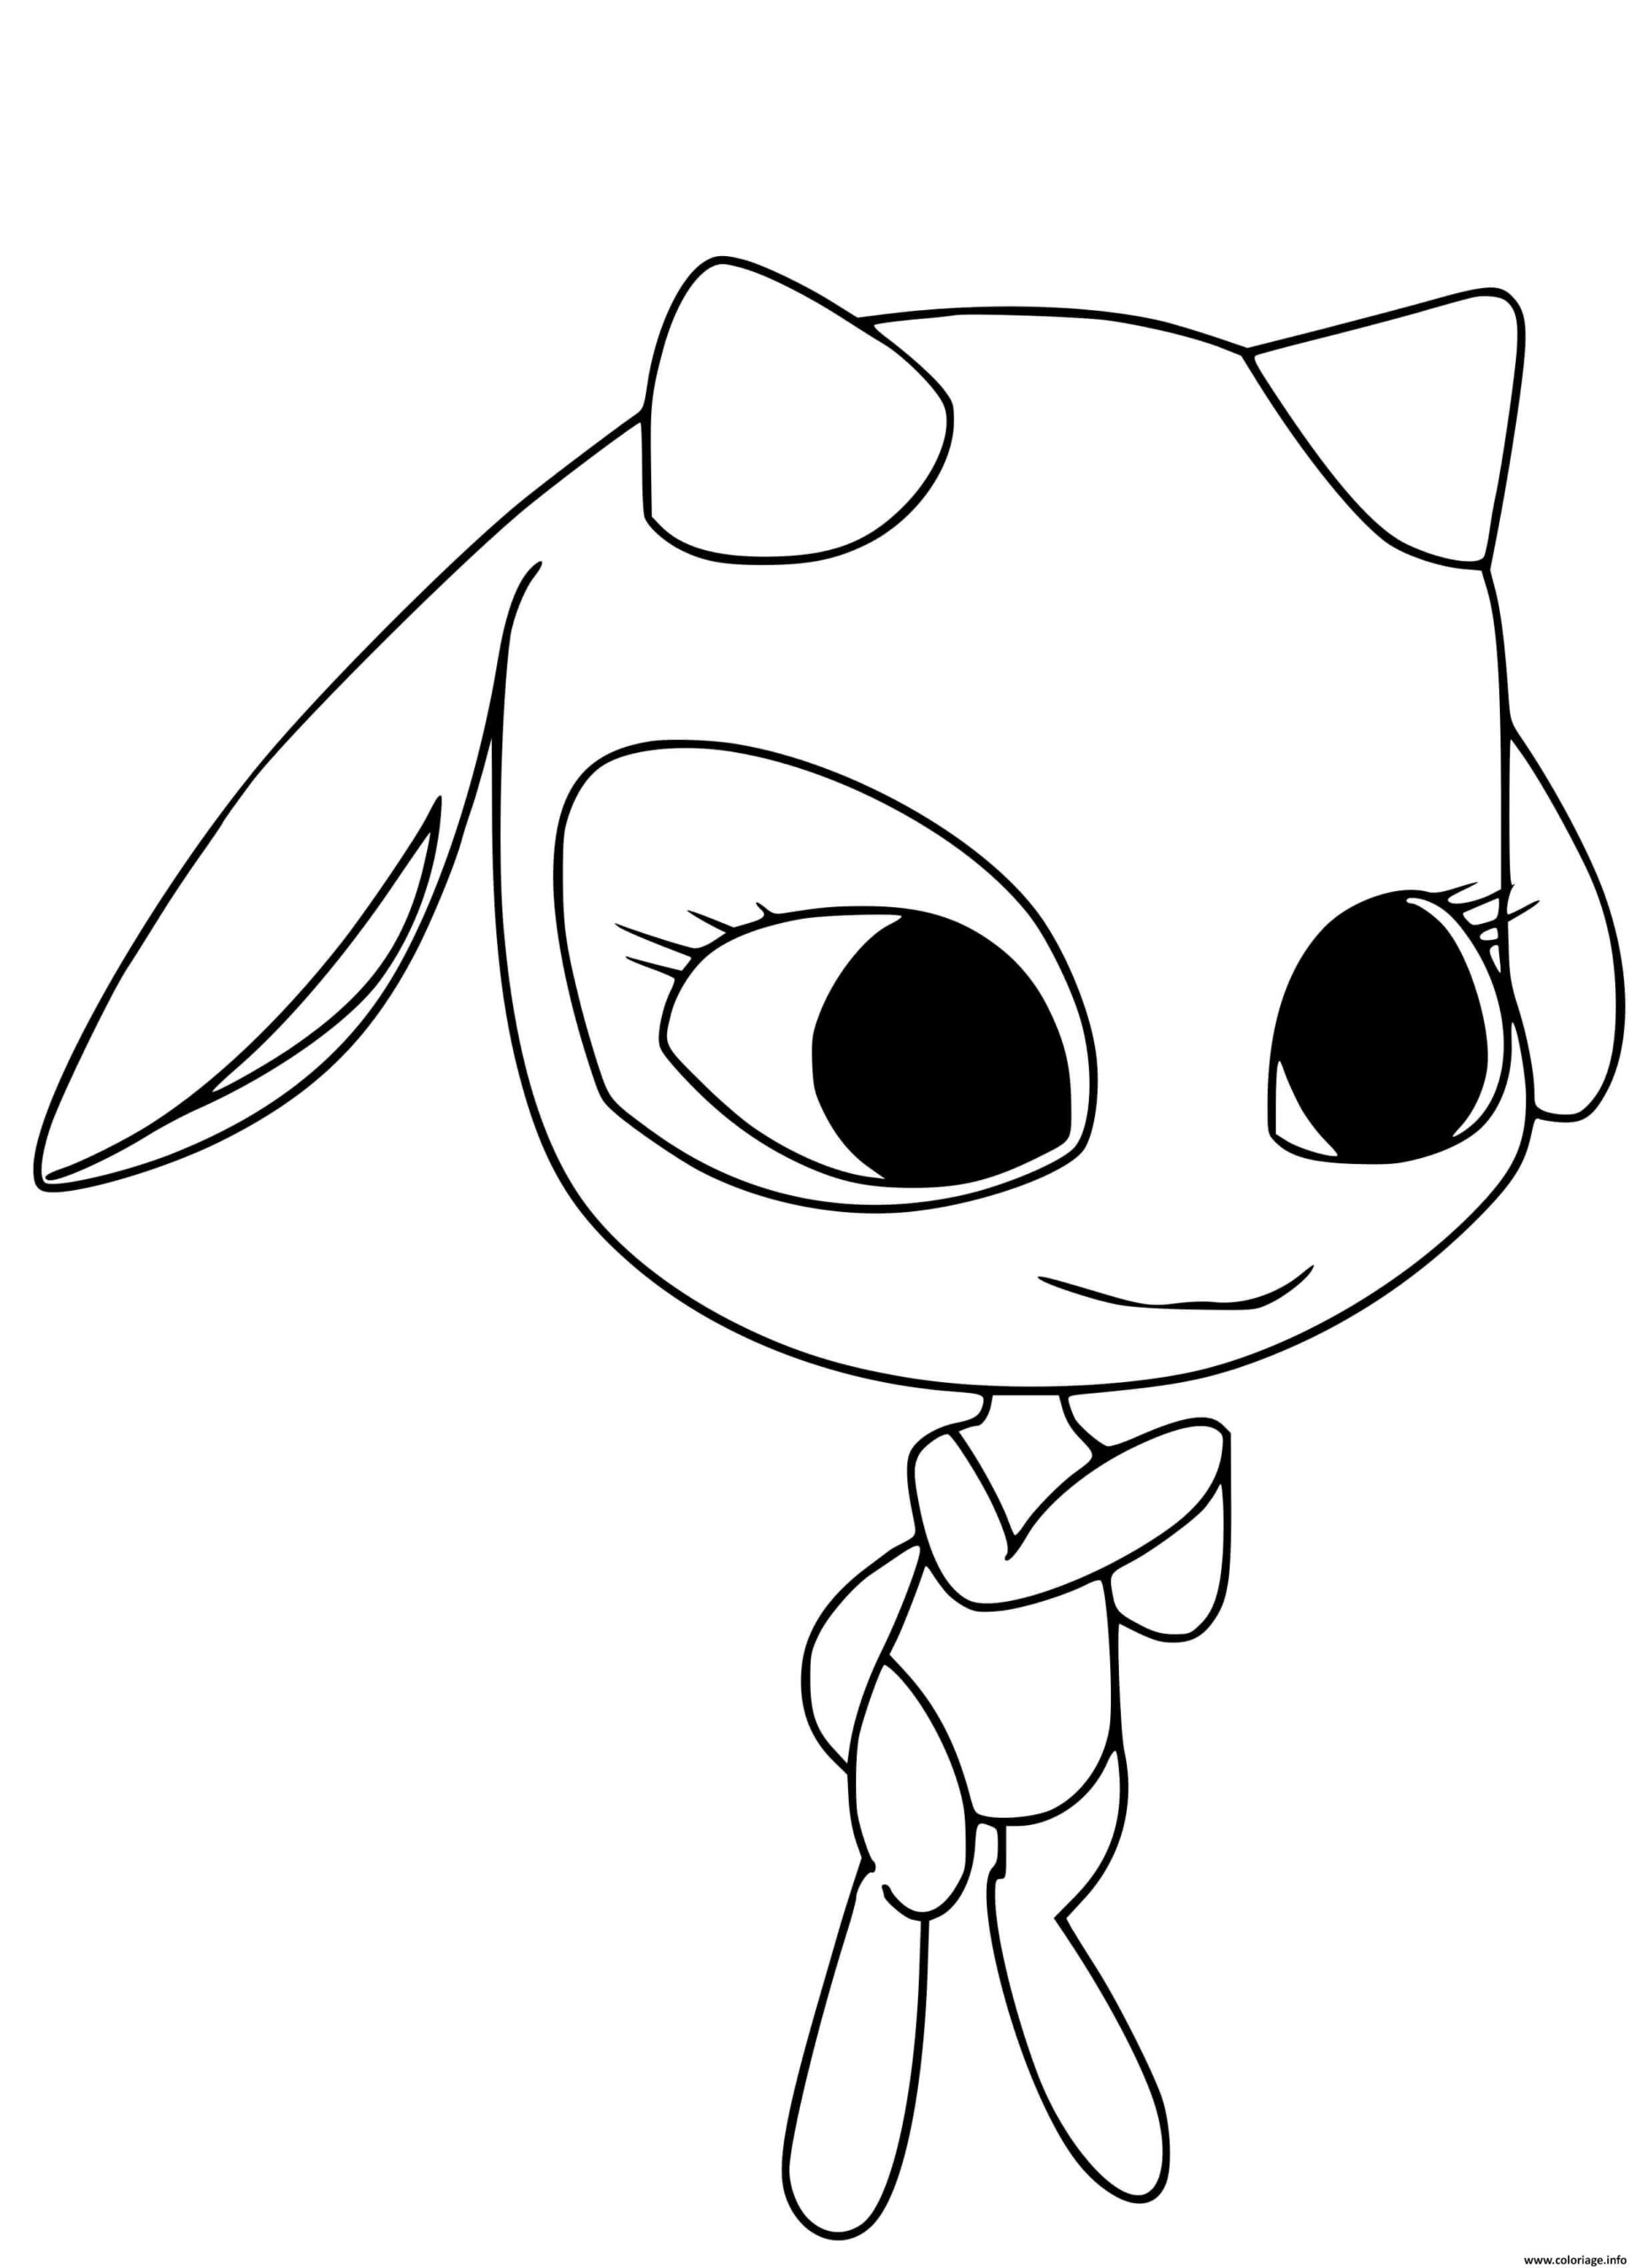 Miraculous Coloring Pages Printable / Free Printable Miraculous Ladybug dedans Miraculous Coloriages